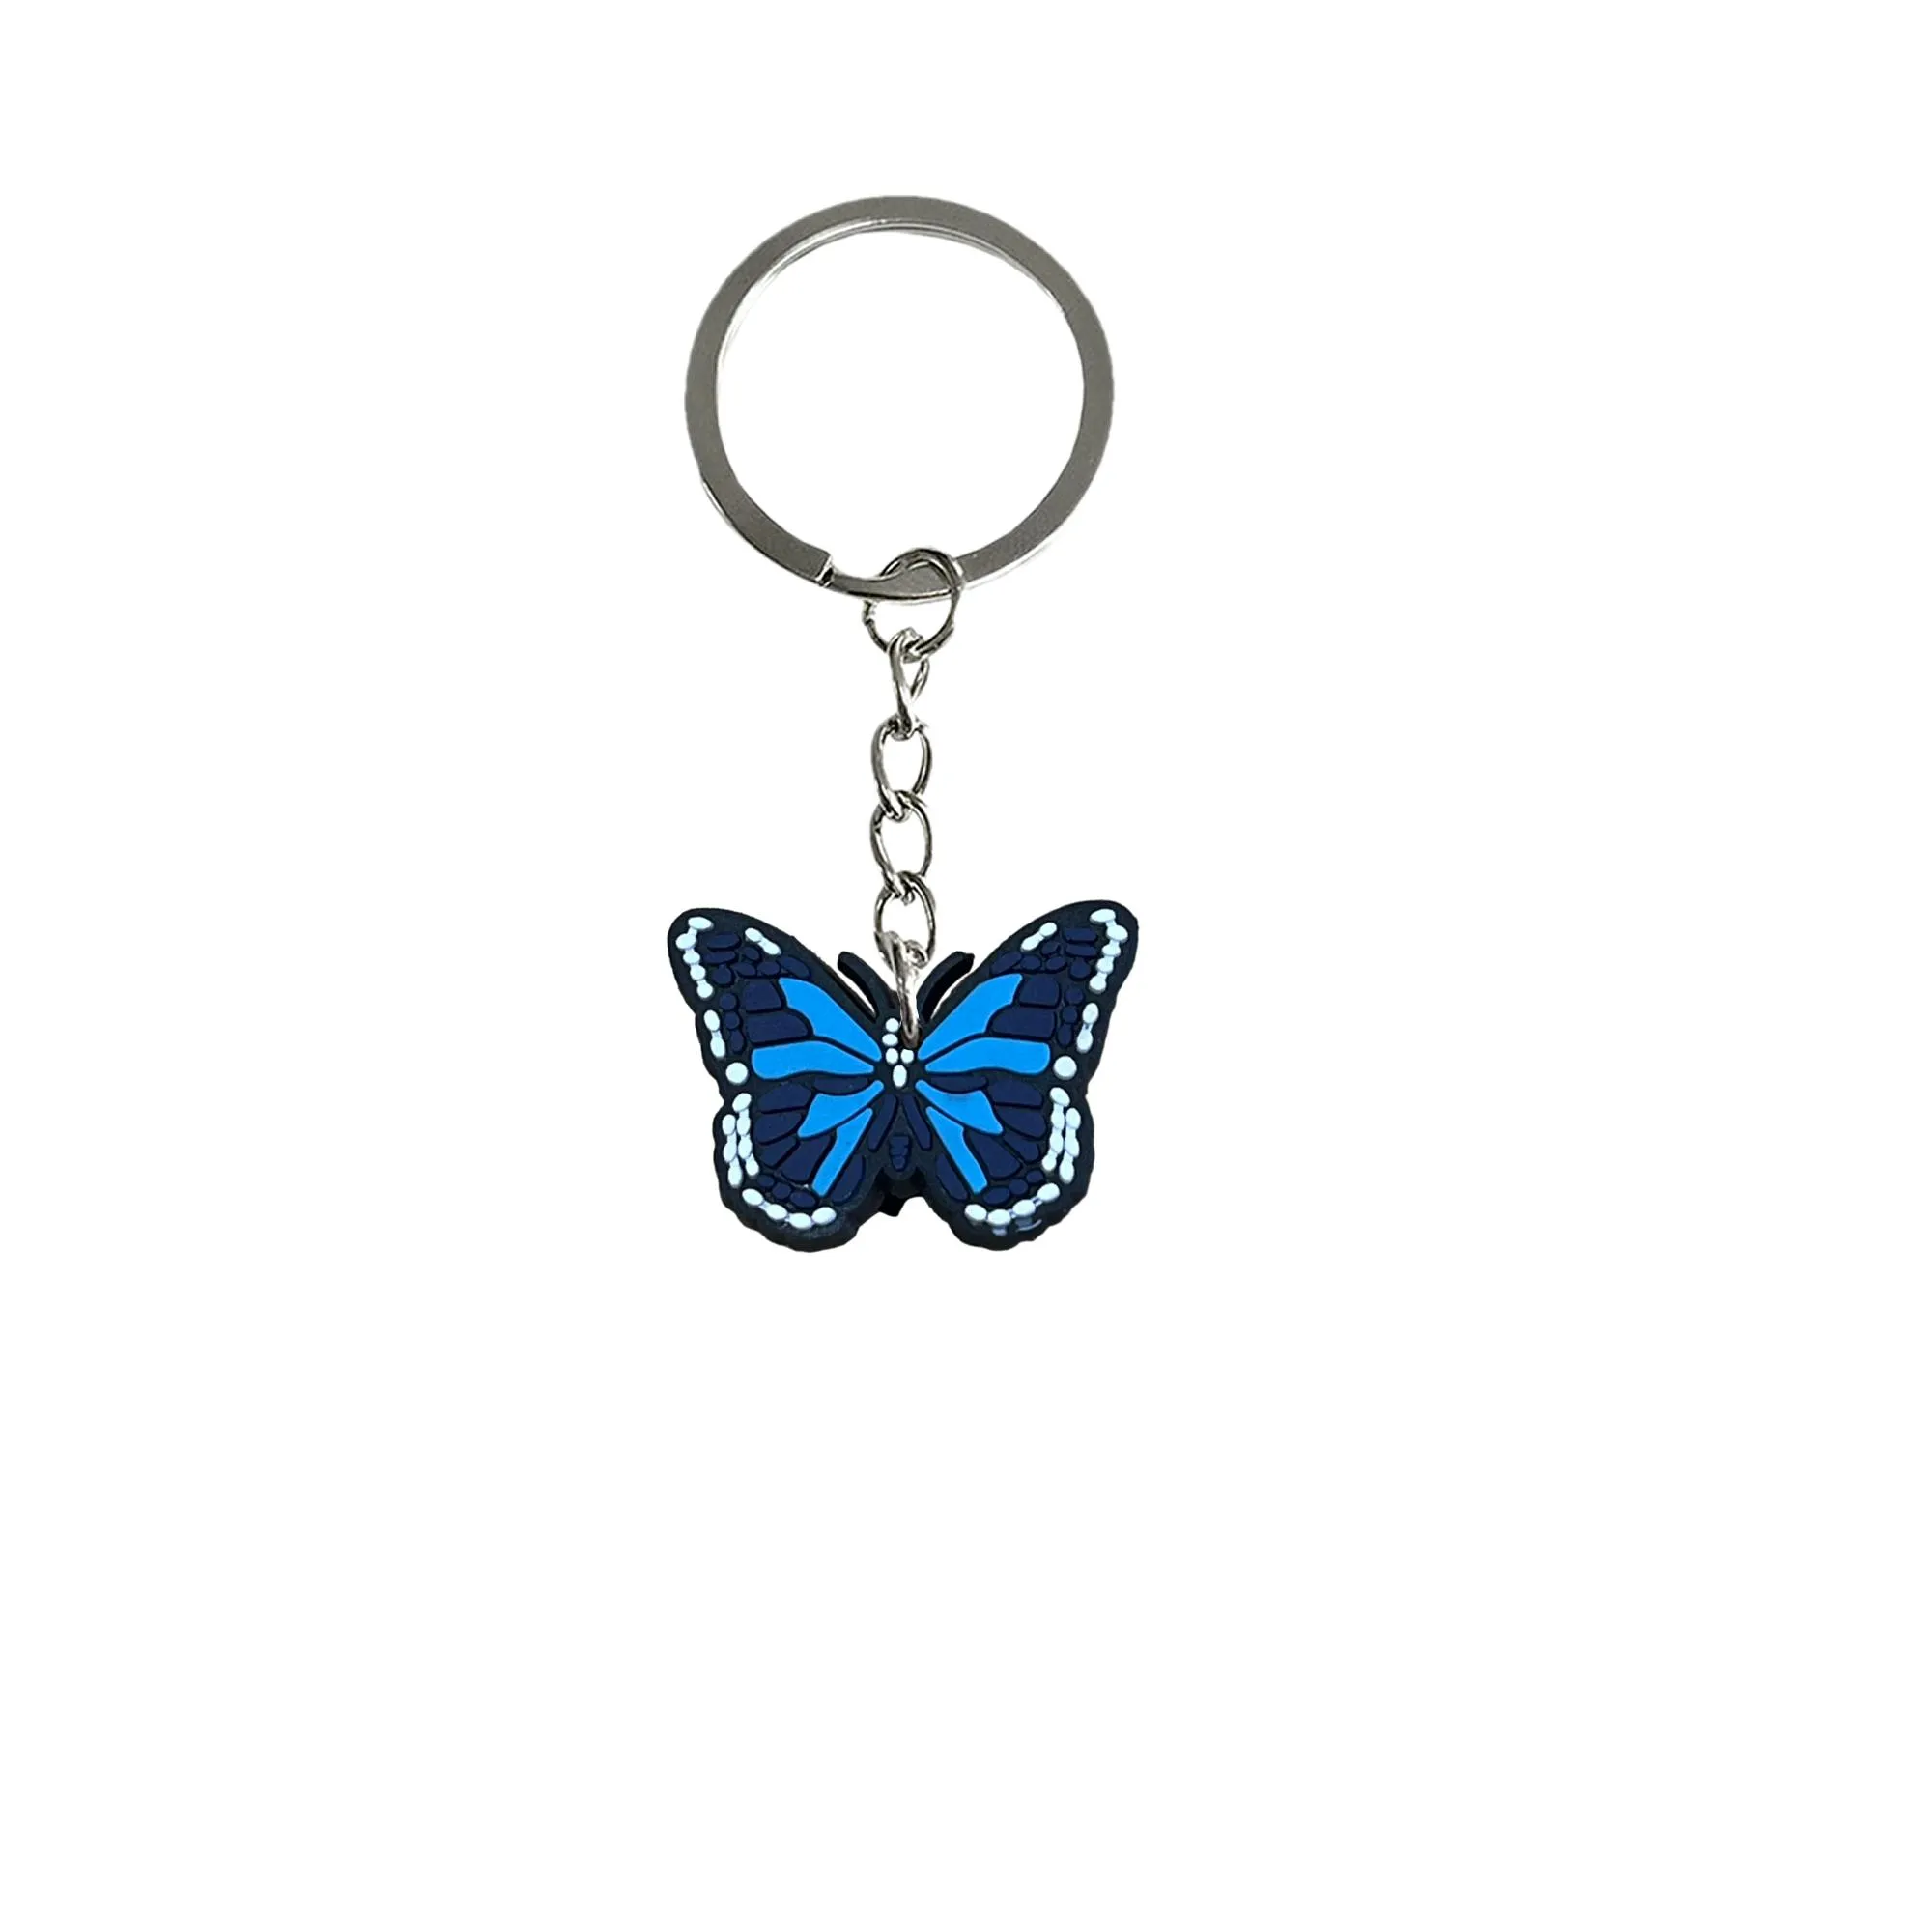 butterfly keychain key ring for boys keyring school bags backpack goodie bag stuffers supplies suitable schoolbag birthday christmas party favors gift shoulder pendant accessories charm keychains tags stuffer gifts and holiday charms